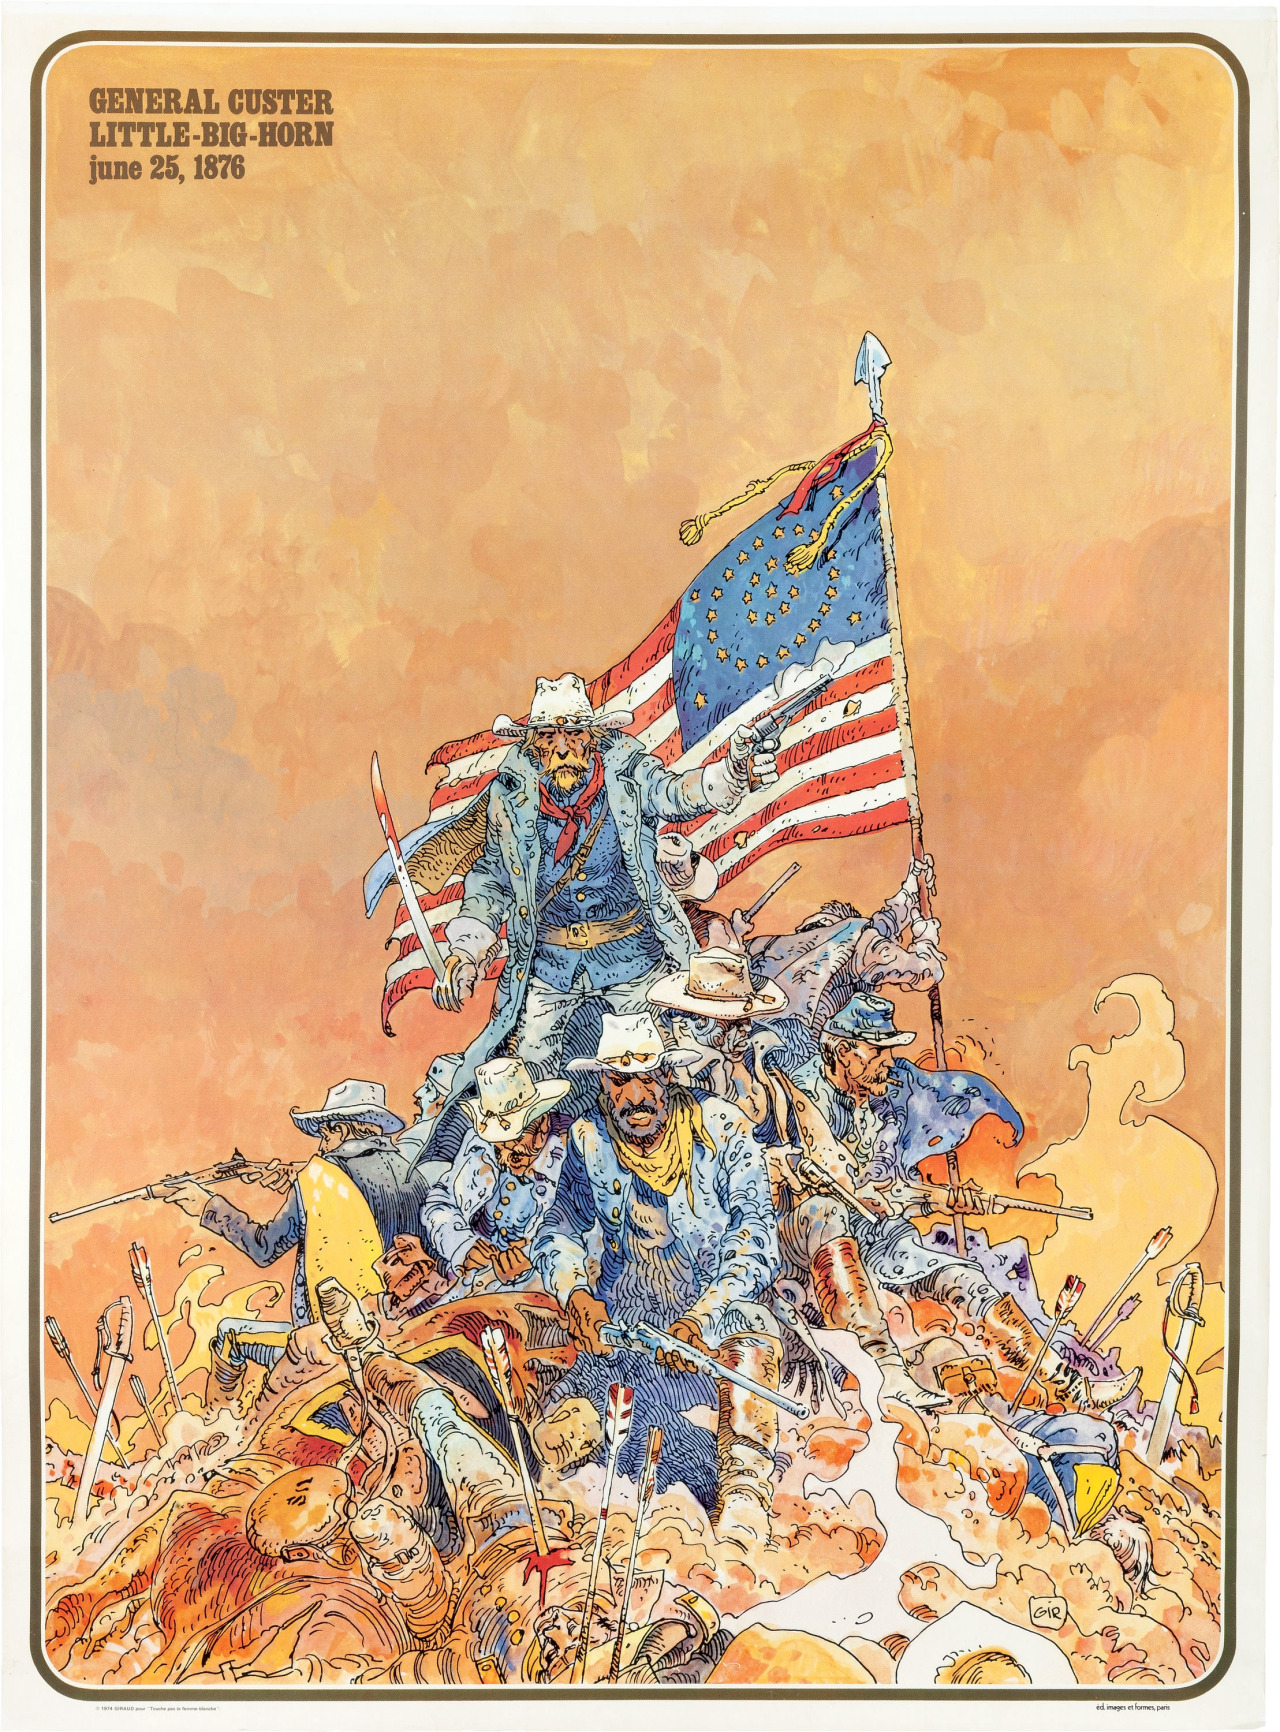 General Custer poster by Moebius, published by Images et Formes, 1974.